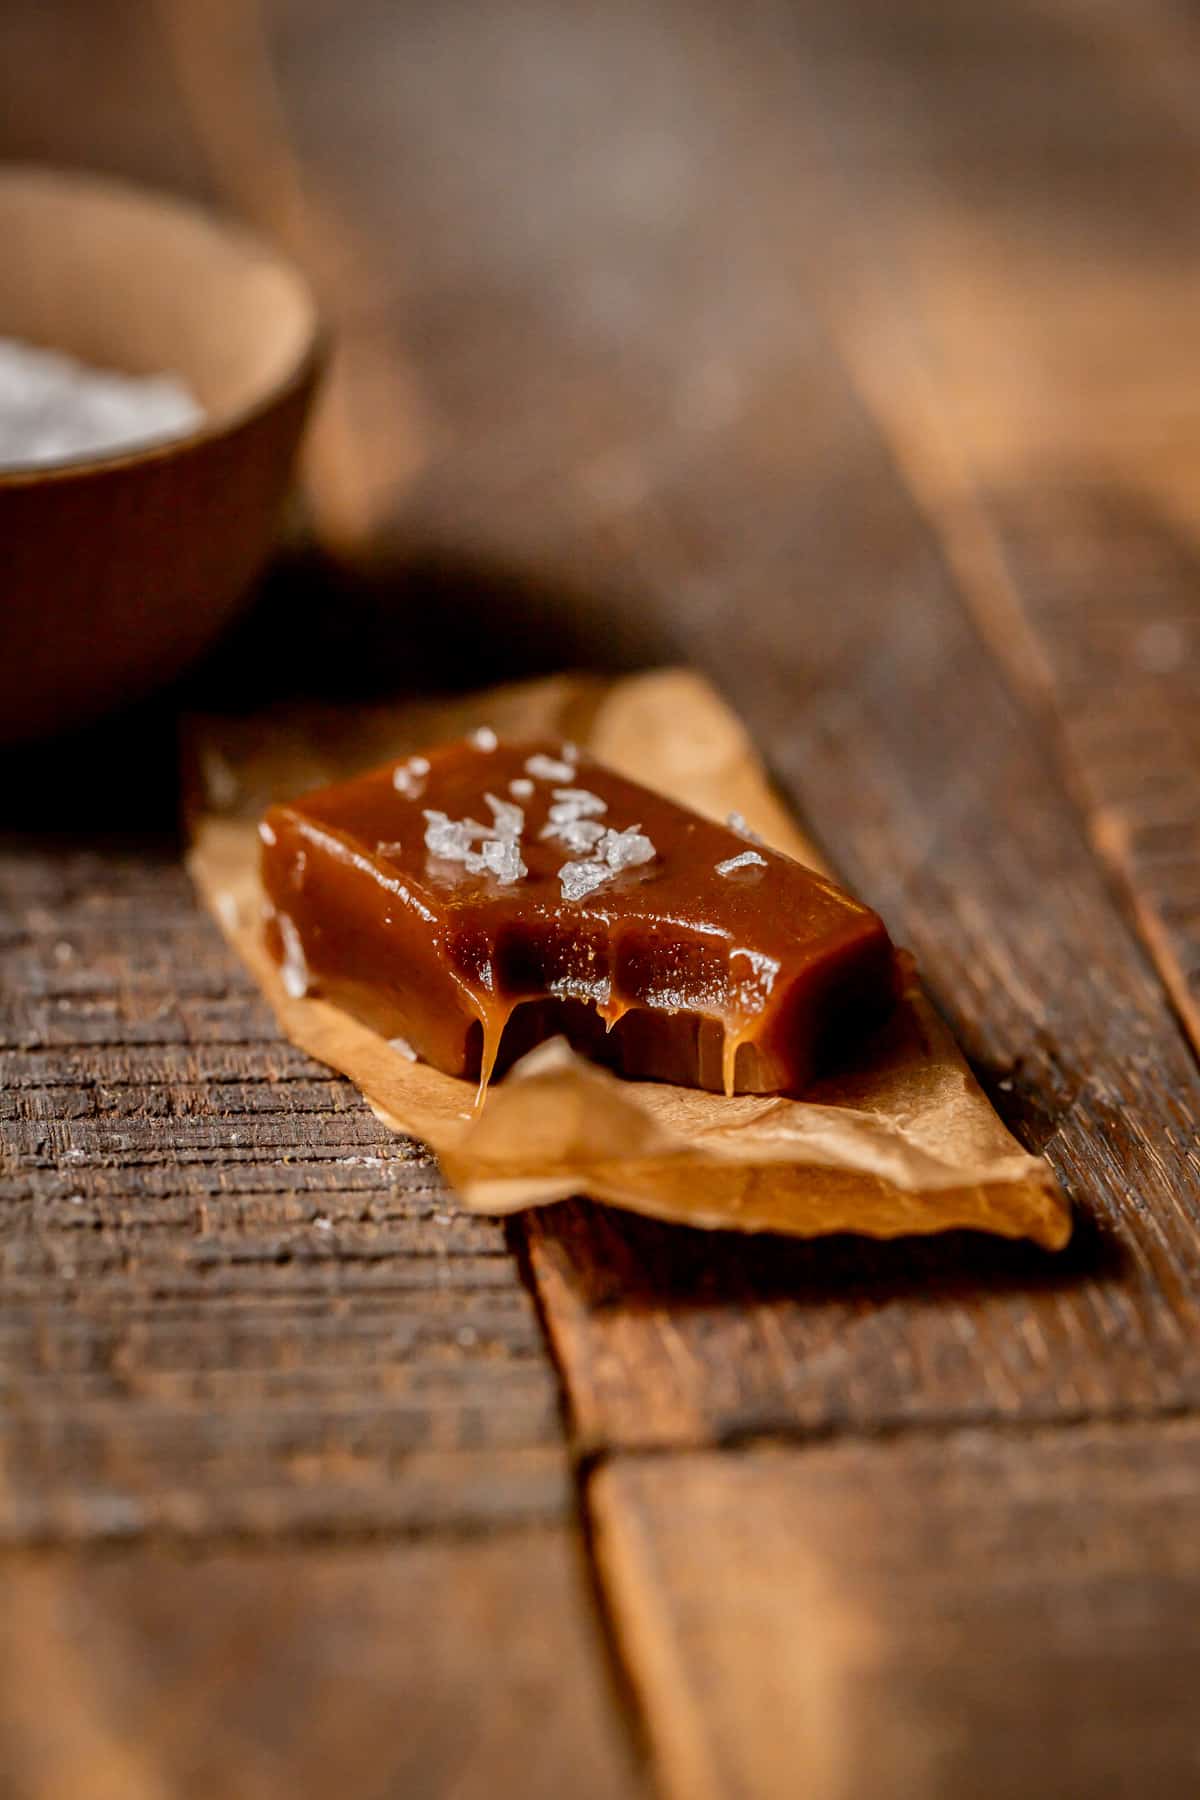 salted whisky caramel on parchment paper with bite taken out.